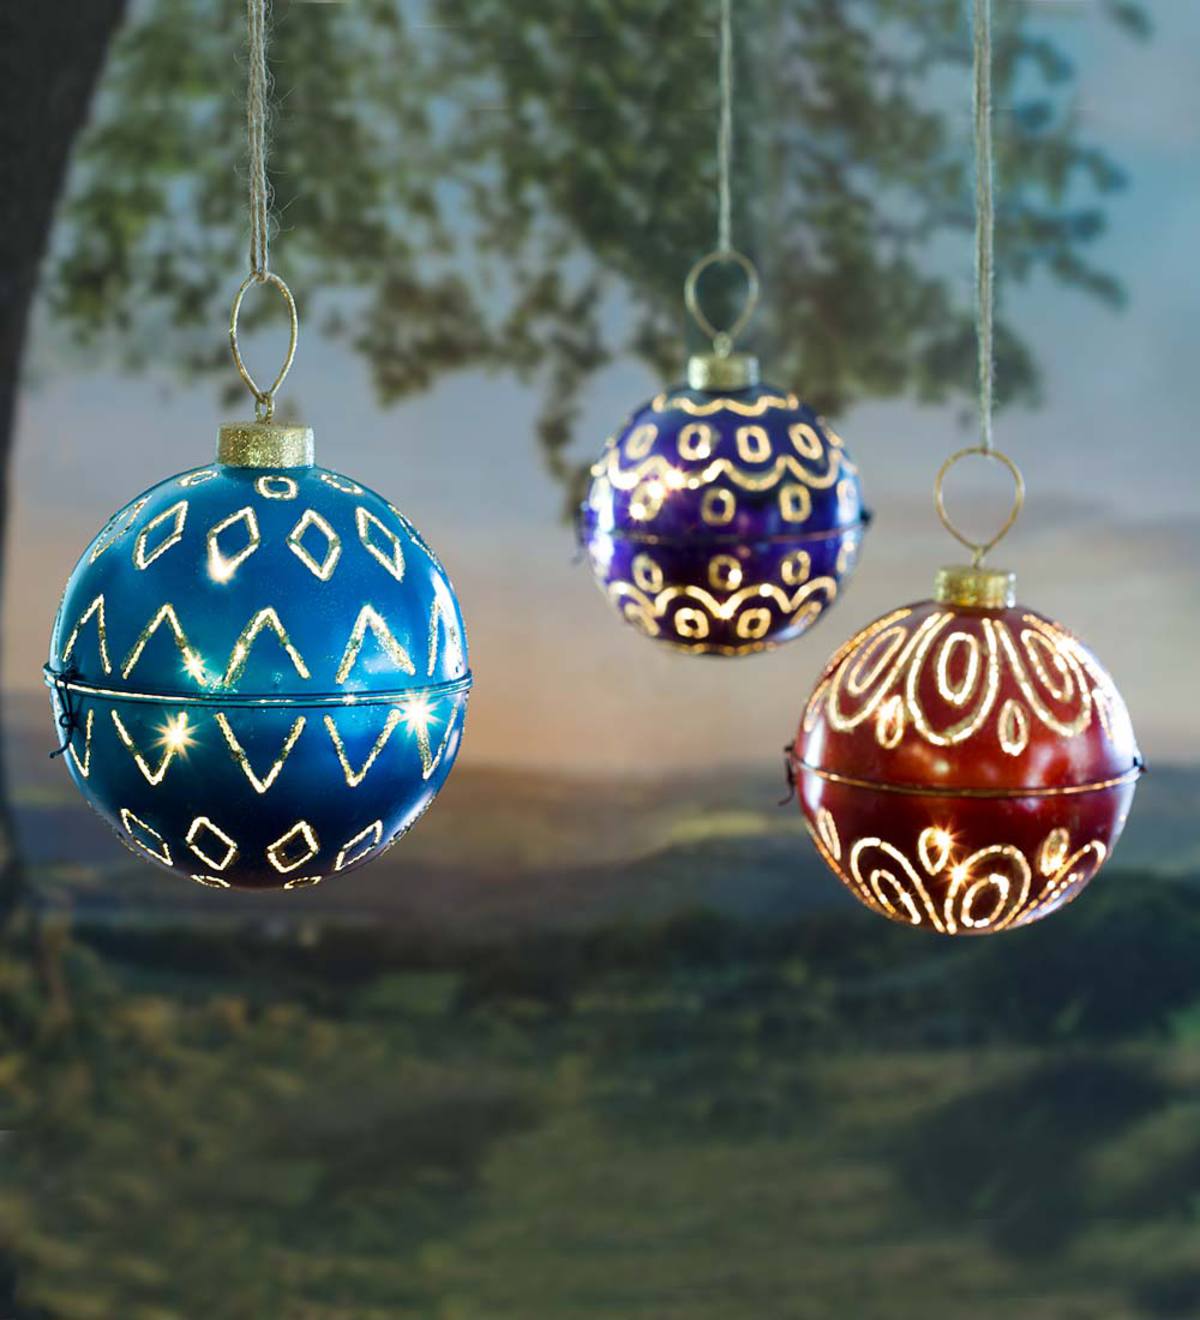 Large Ball Ornament with Lights